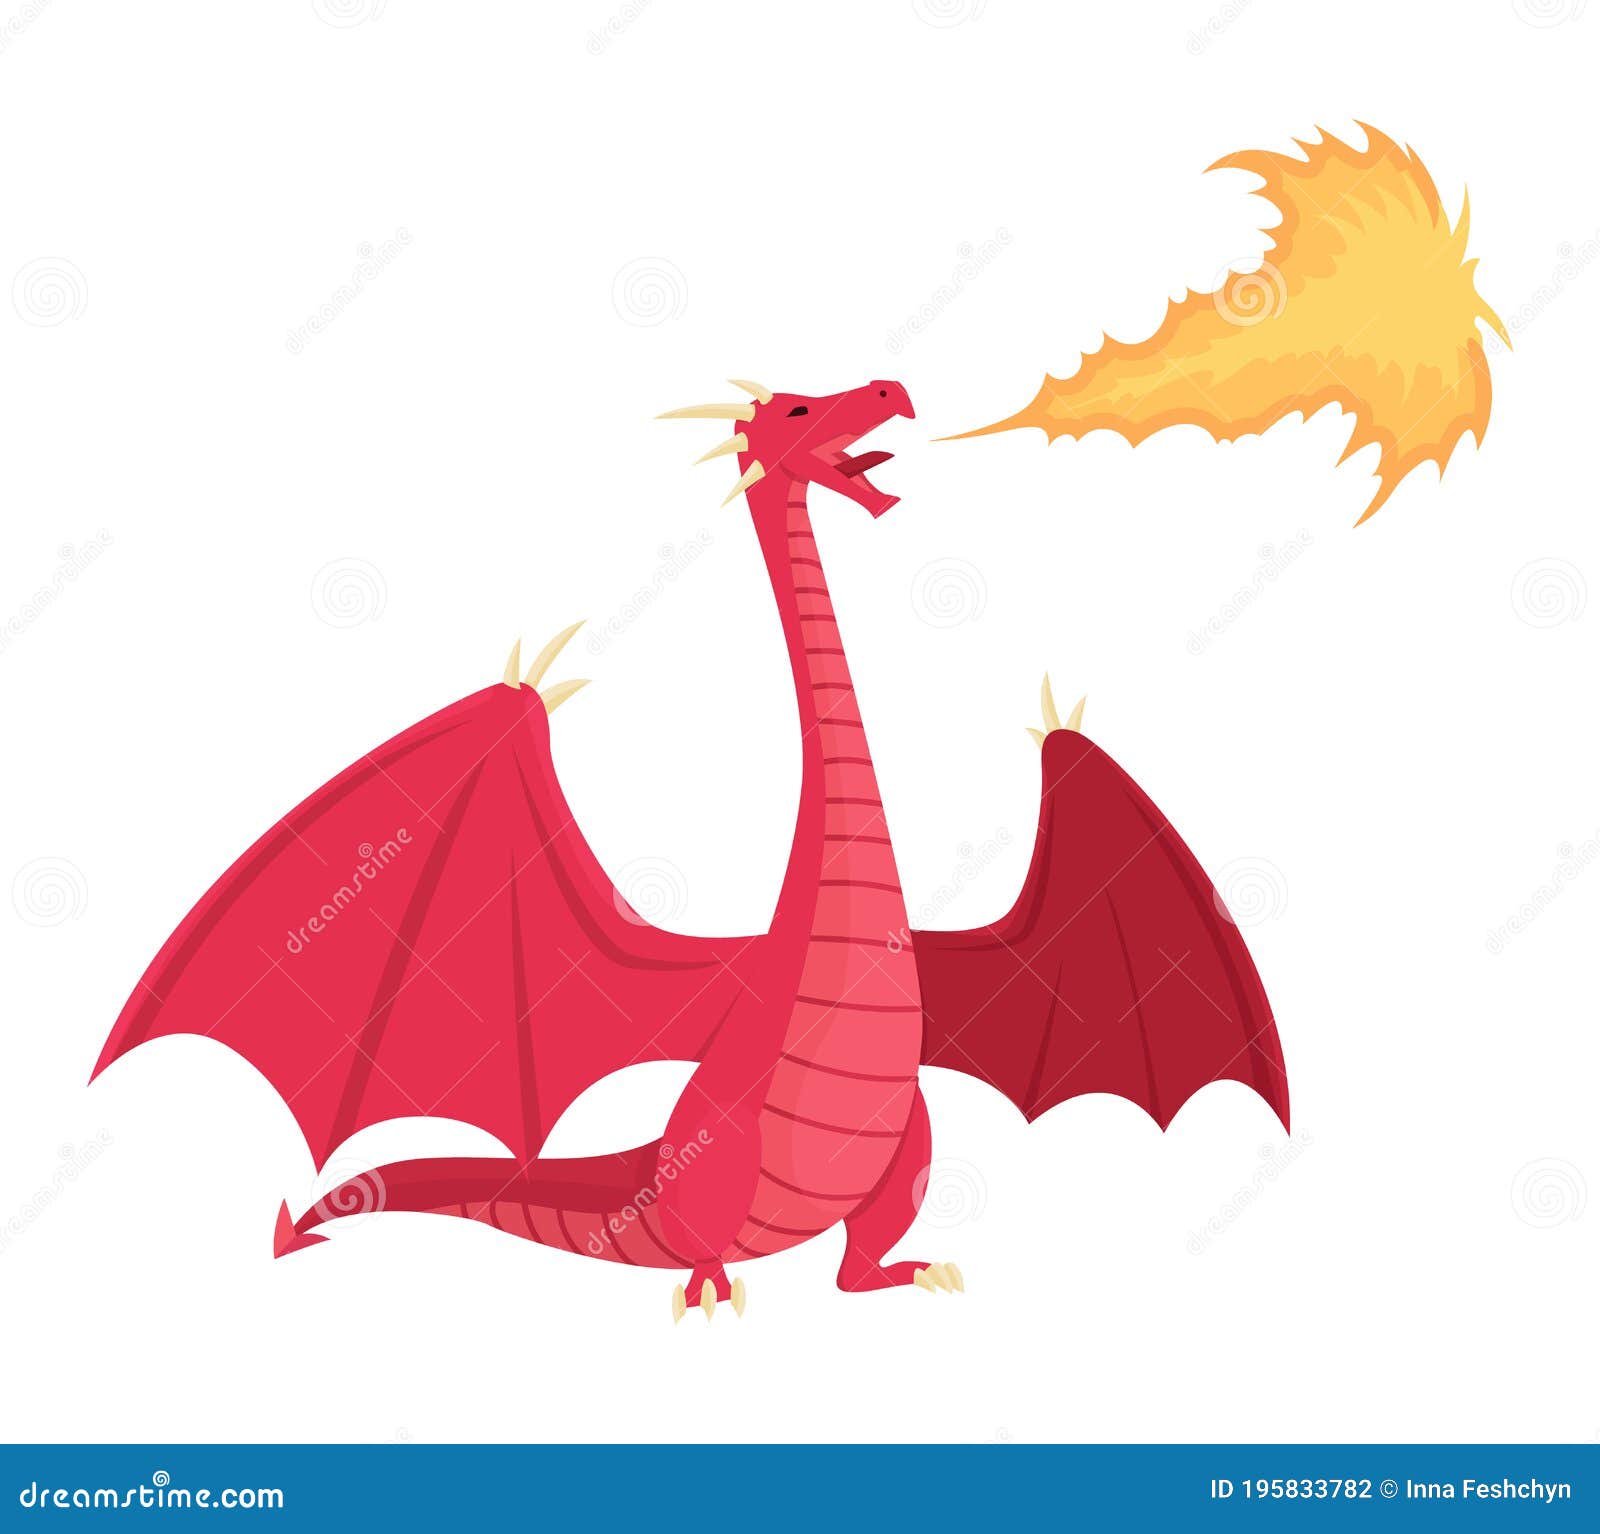 medieval dragons breathing fire